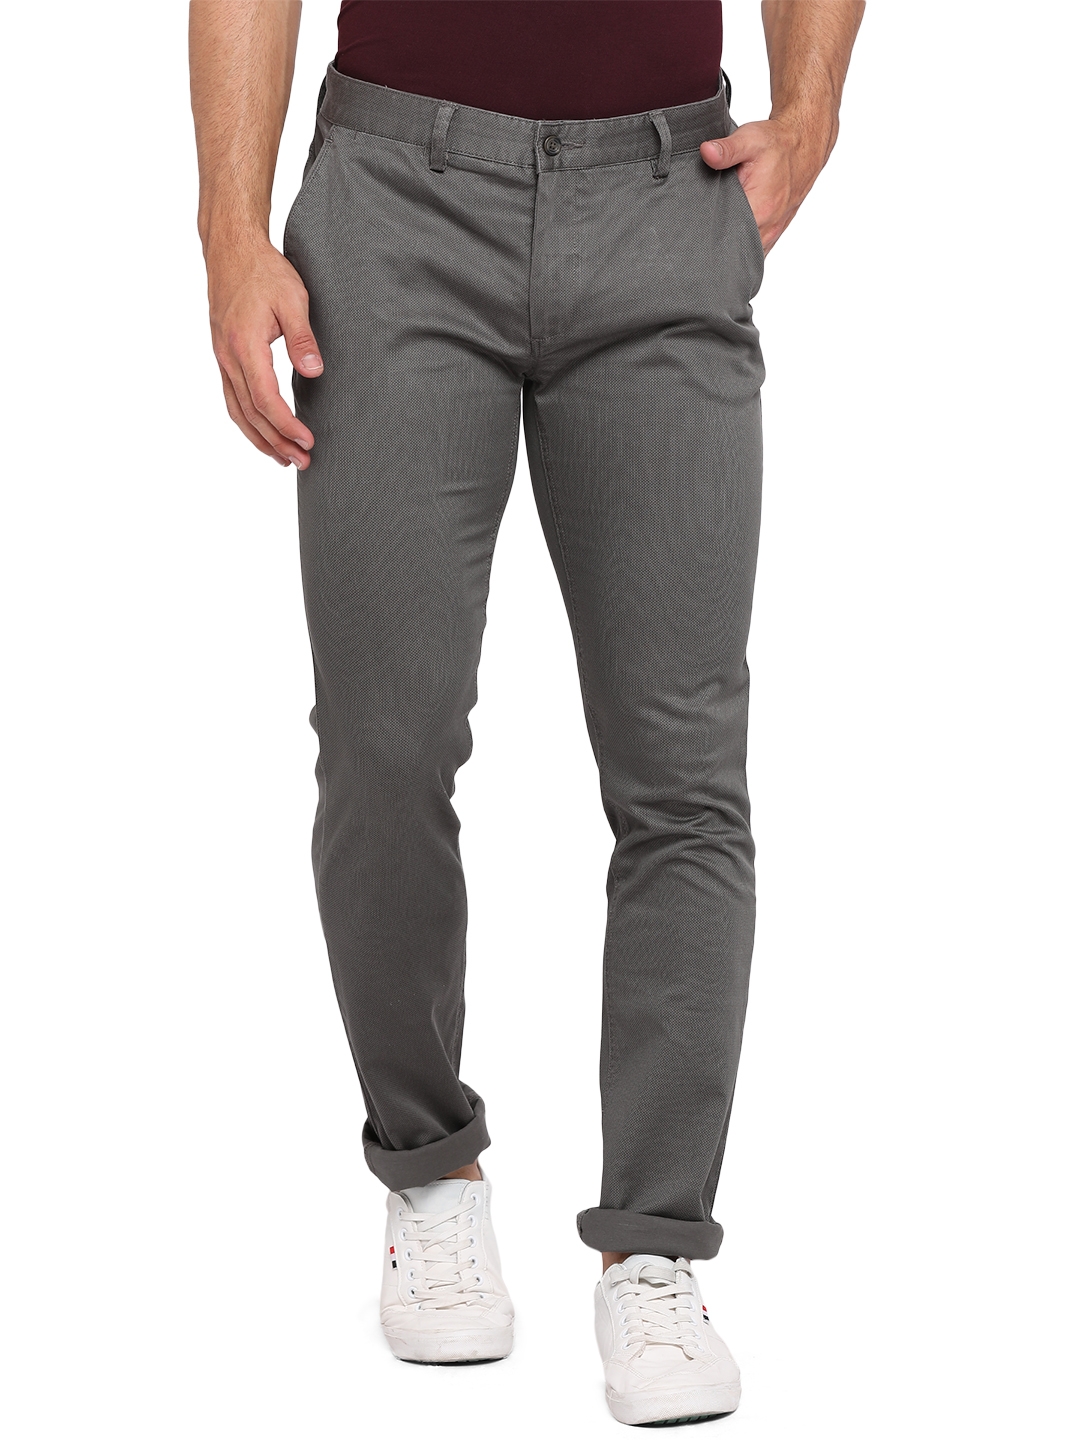 Greenfibre | Grey Solid Slim Fit Casual Trouser | Greenfibre 0